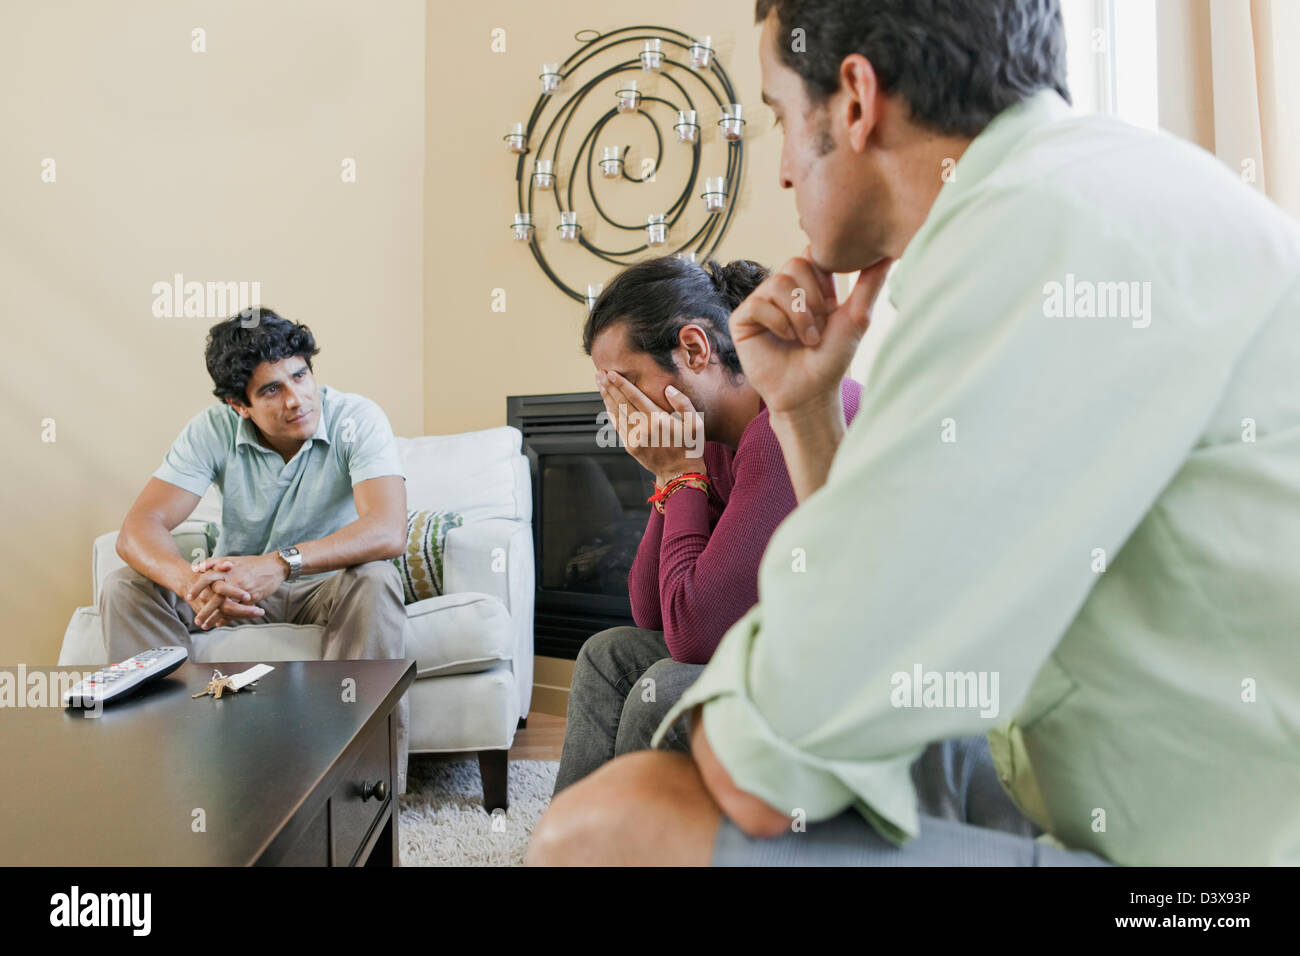 Mexican-American Men Helping Friend Solve Personal Problems by Group Intervention Stock Photo